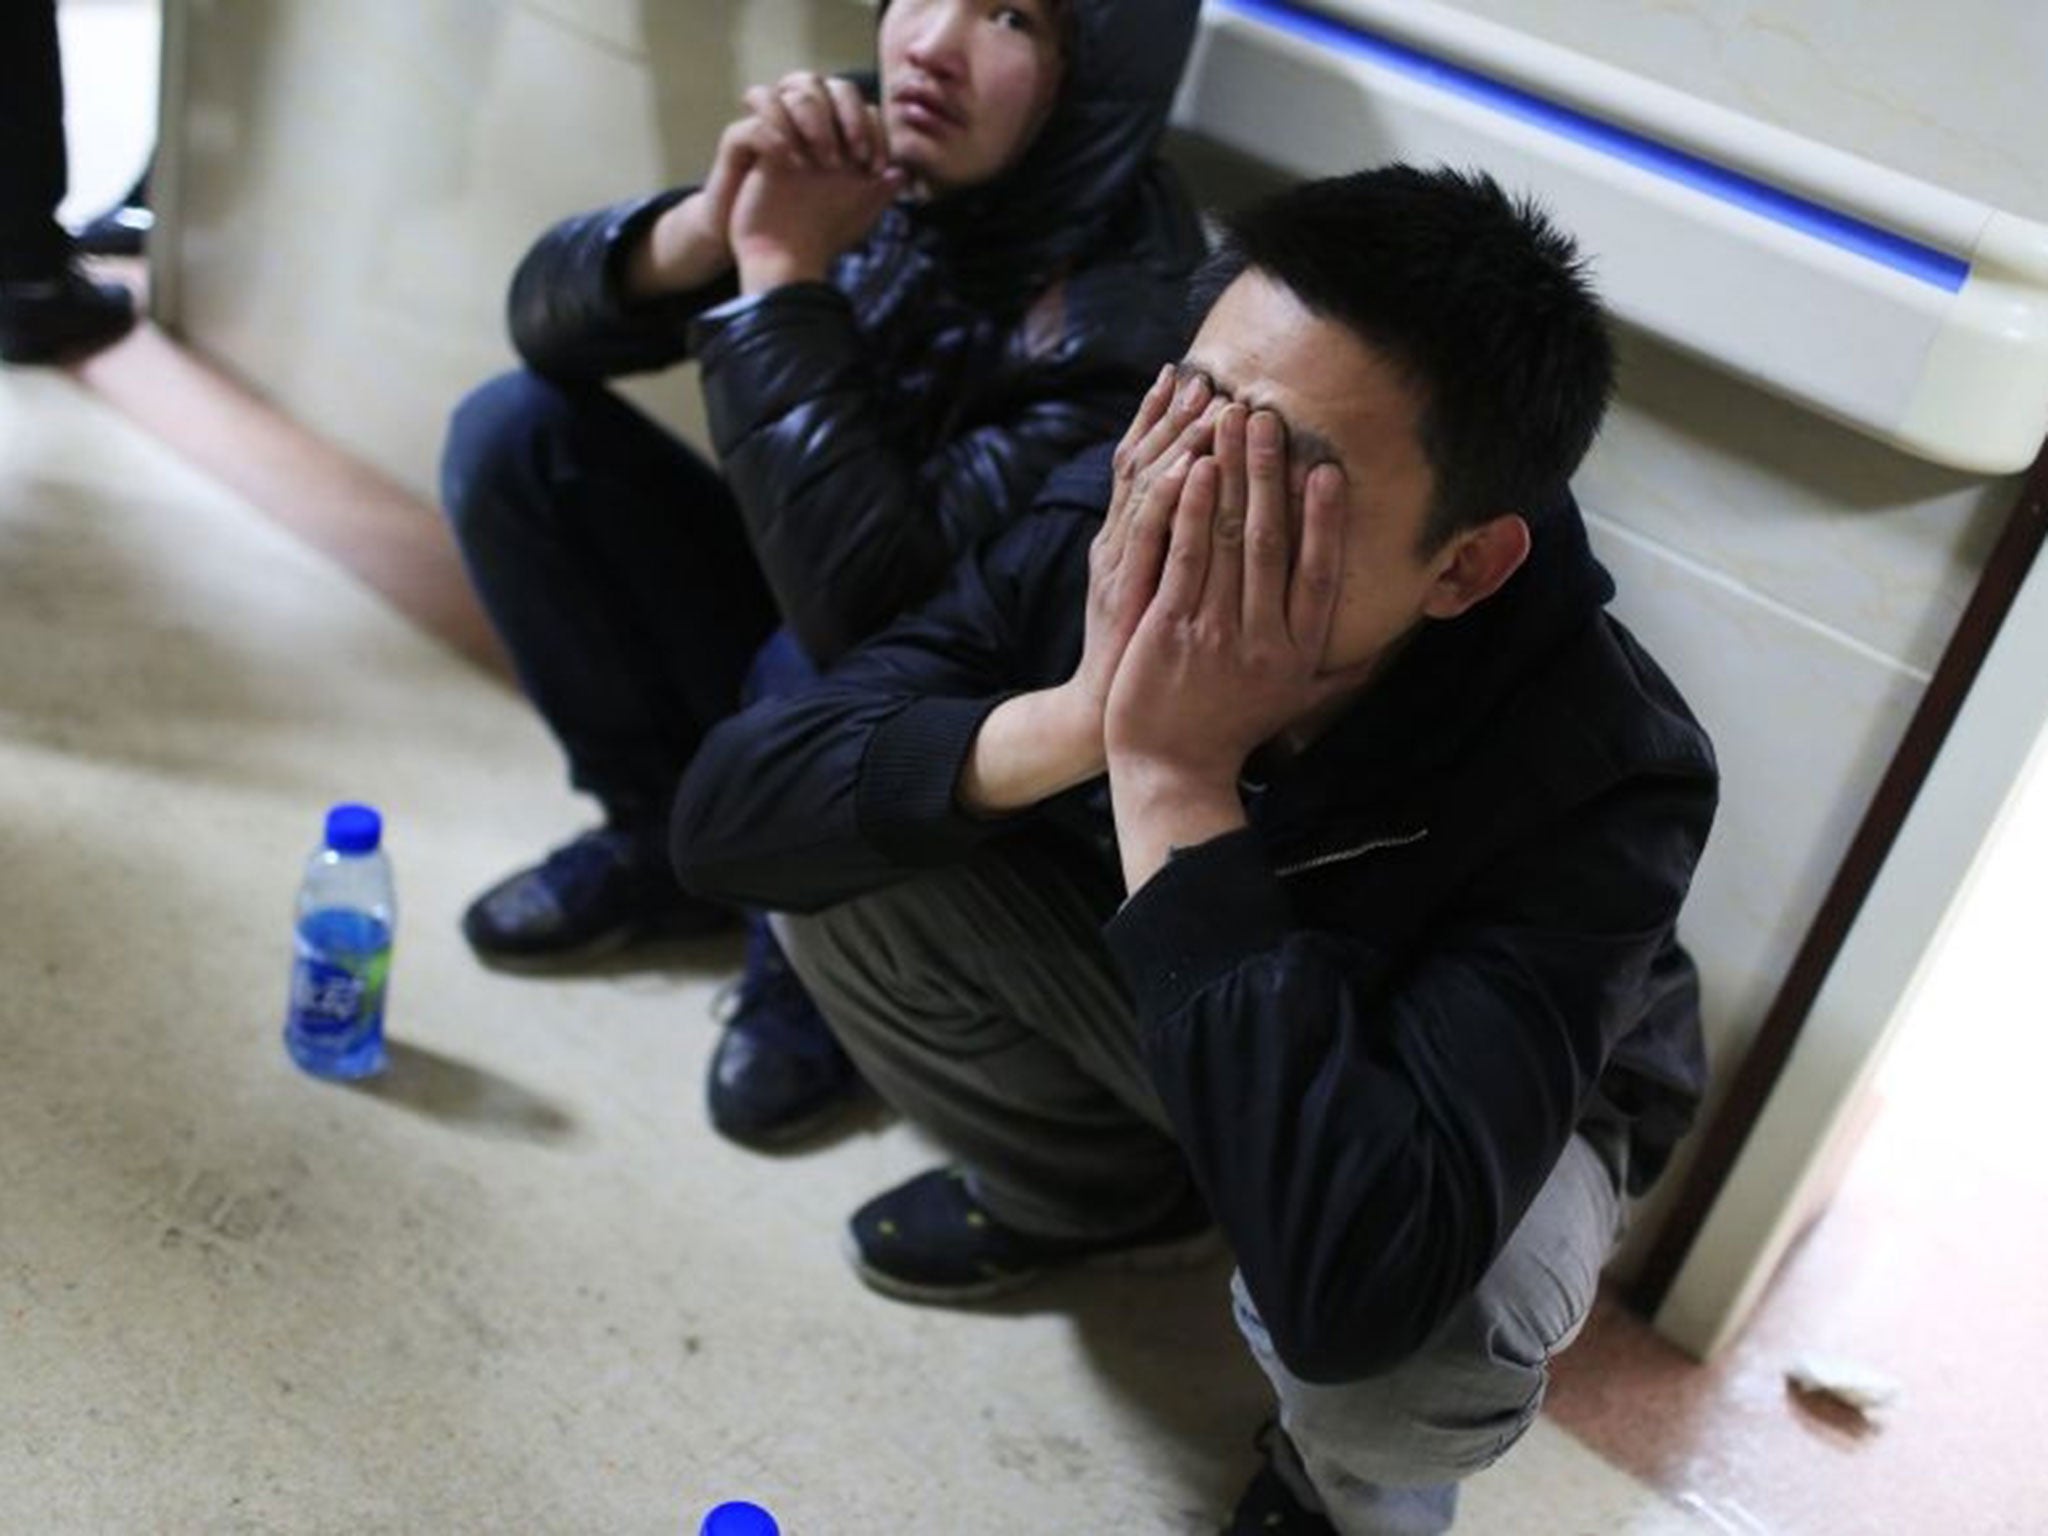 A friend of a victim covers his face as he waits outside a hospital where injured people of a stampede incident are treated, in Shanghai